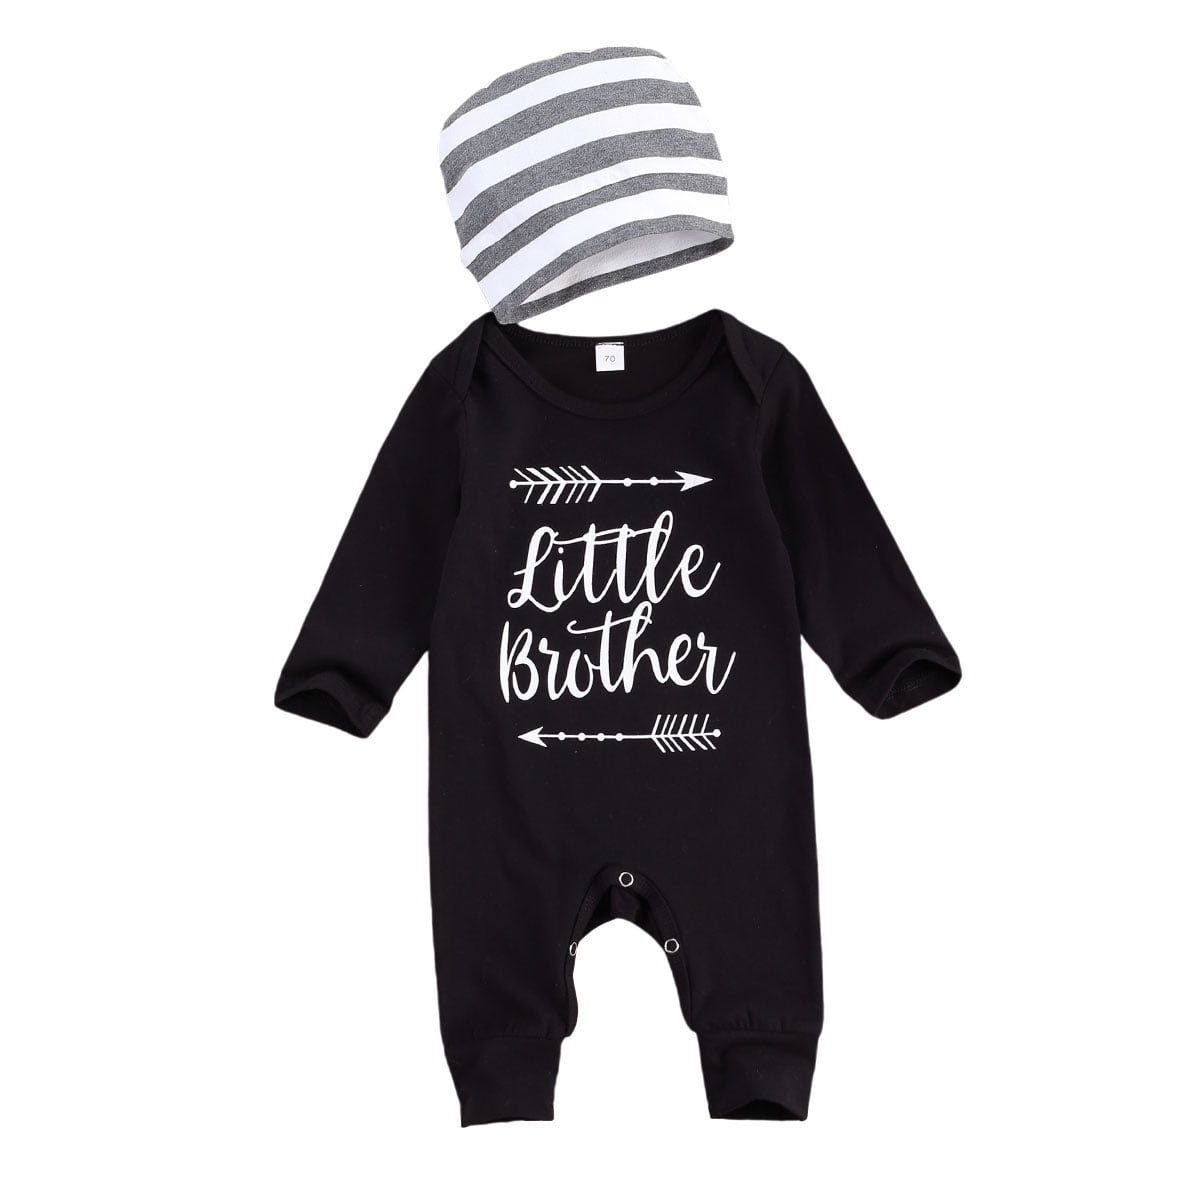 Newborn Baby Boy Romper Clothe Little Brother Long Sleeve Jumpsuits One ...